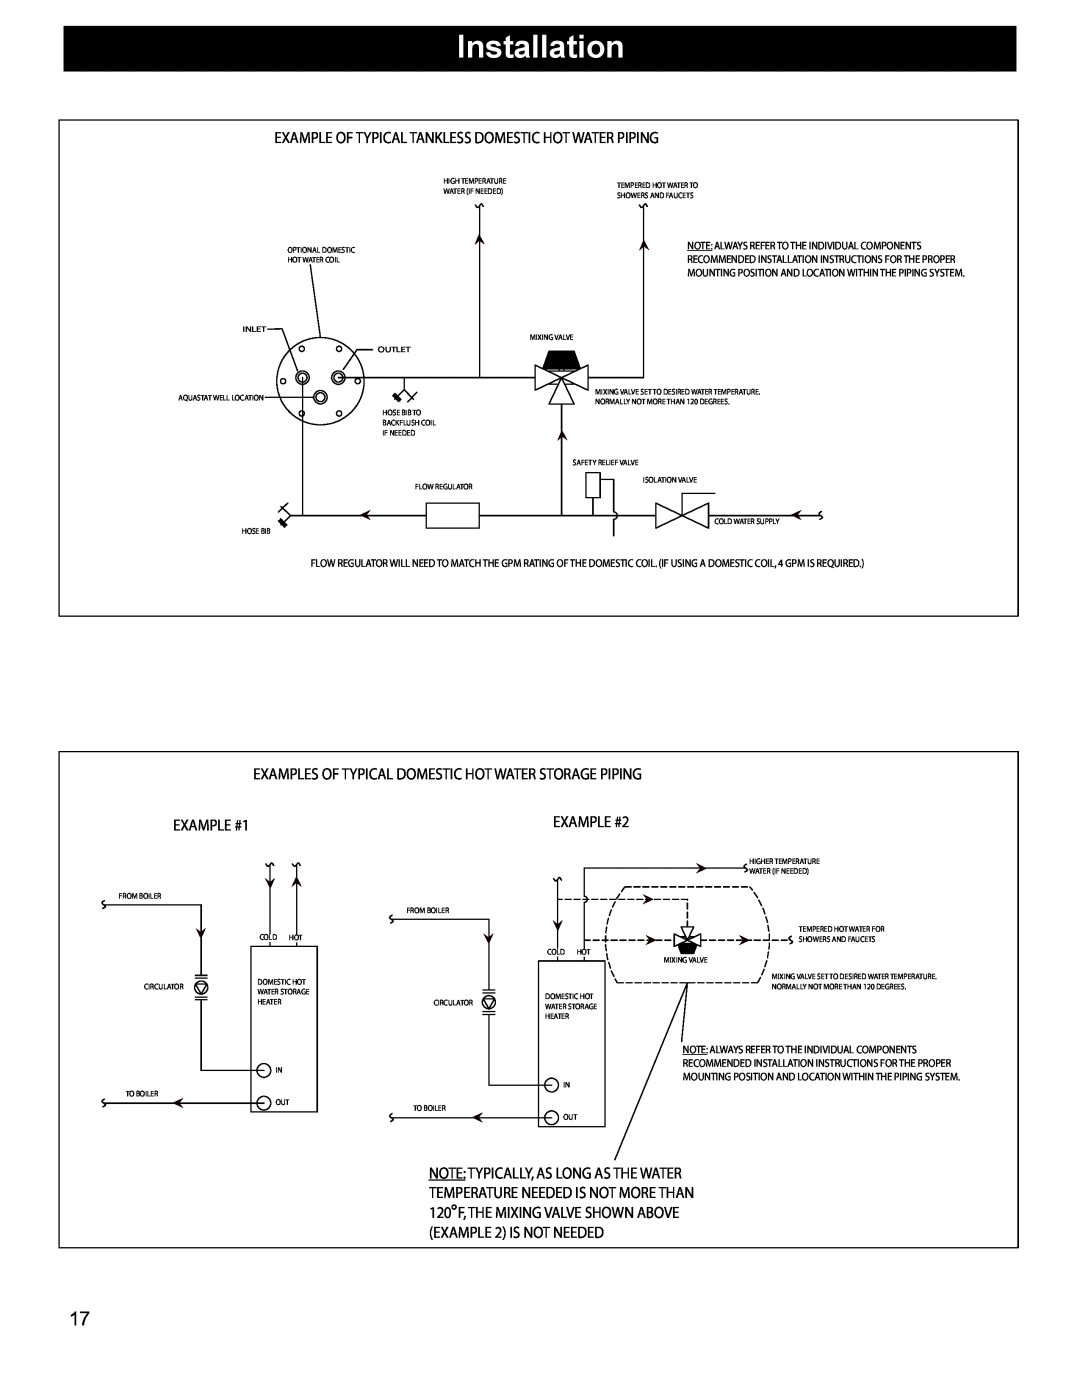 Hearth and Home Technologies BH 105 manual Installation, Example Of Typical Tankless Domestic Hot Water Piping, EXAMPLE #1 